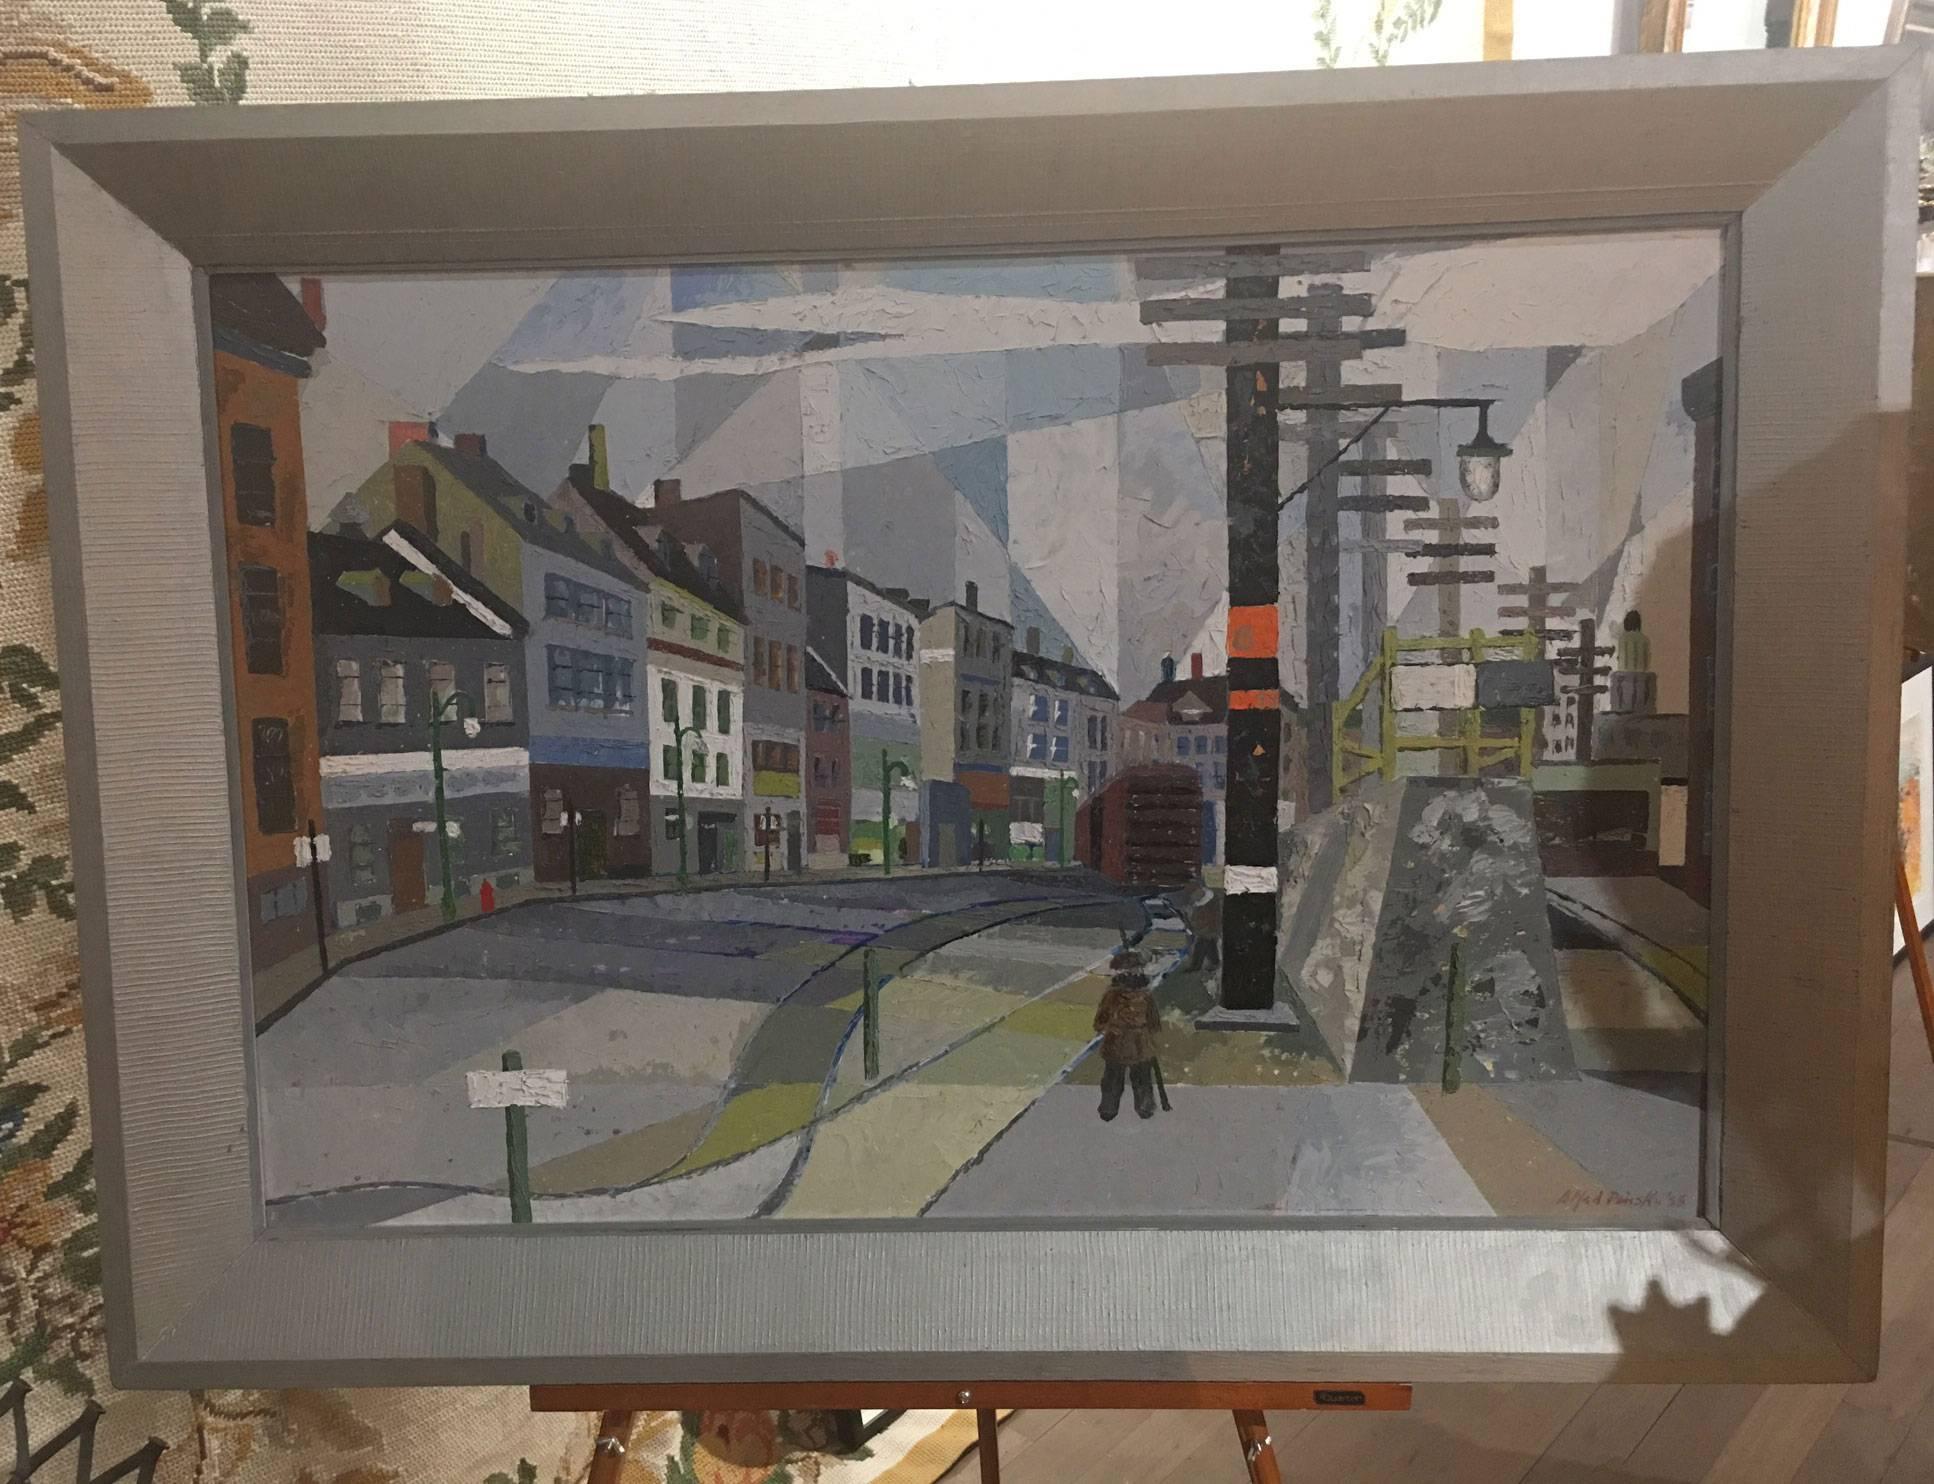 Montreal comes to life on Pinsky’s delightful painting of a Montreal street scene; Signed and dated lower right side: Alfred Pinsky 1955. Canvas size: 36” x 24”; framed size: 43” x 31”.Alfred Pinsky (1921-2000) was an accomplished 20th century